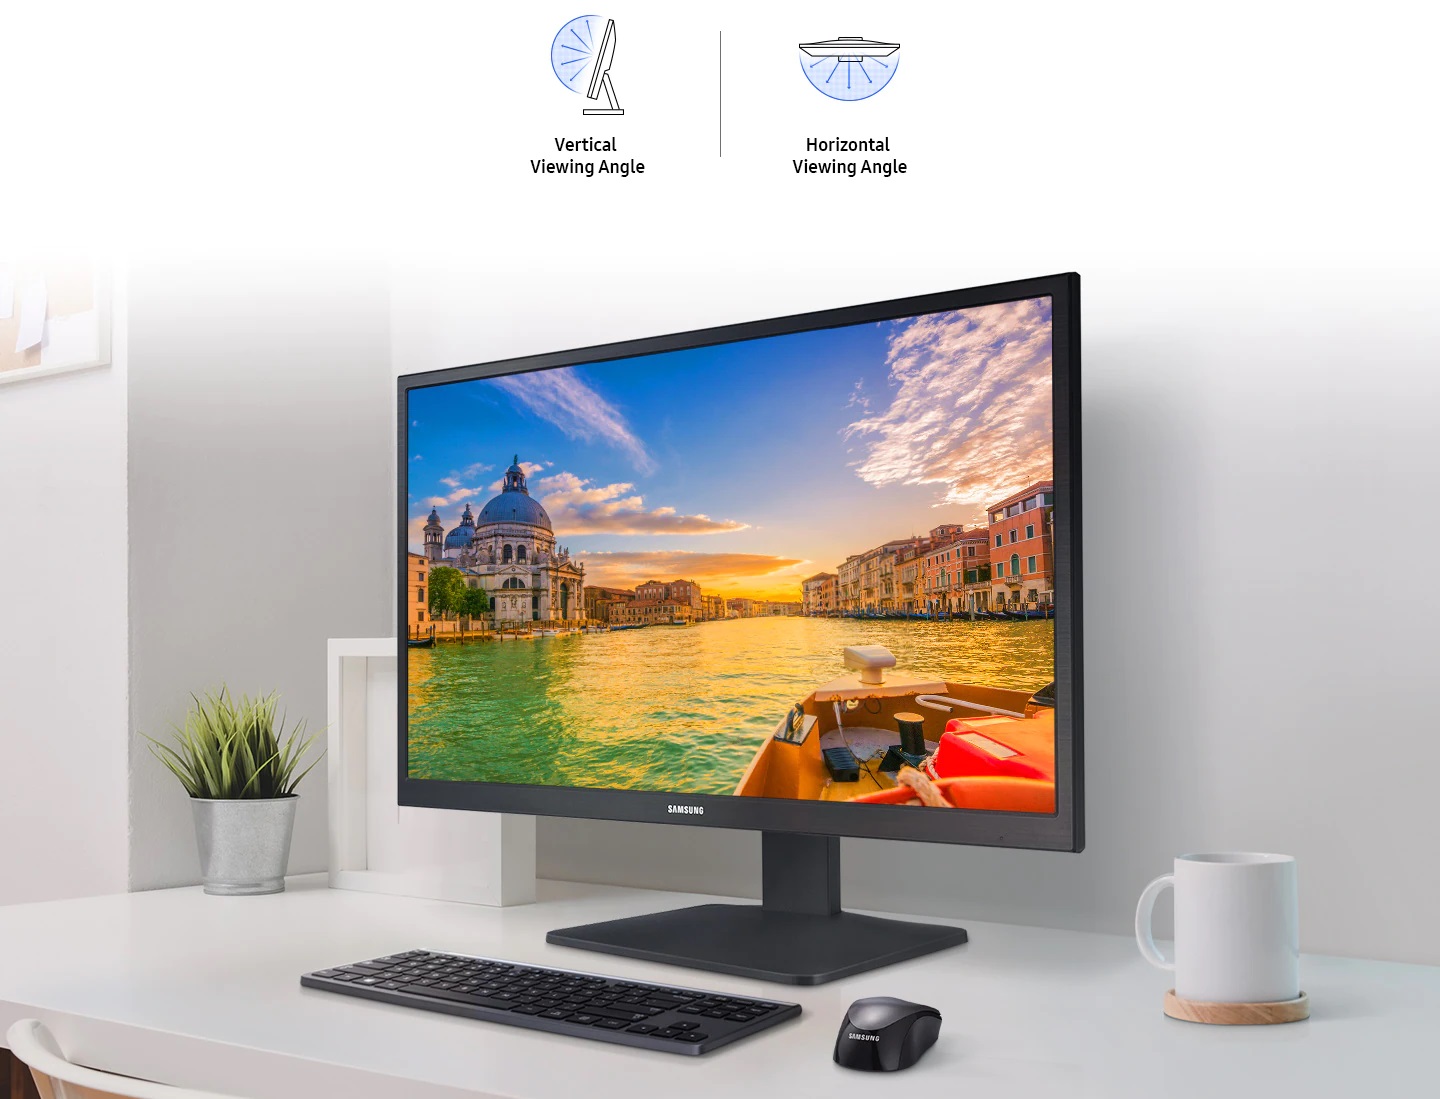 Samsung 22″ FHD Flat Monitor with Wide Viewing Angle – LS22A330NHMXUE